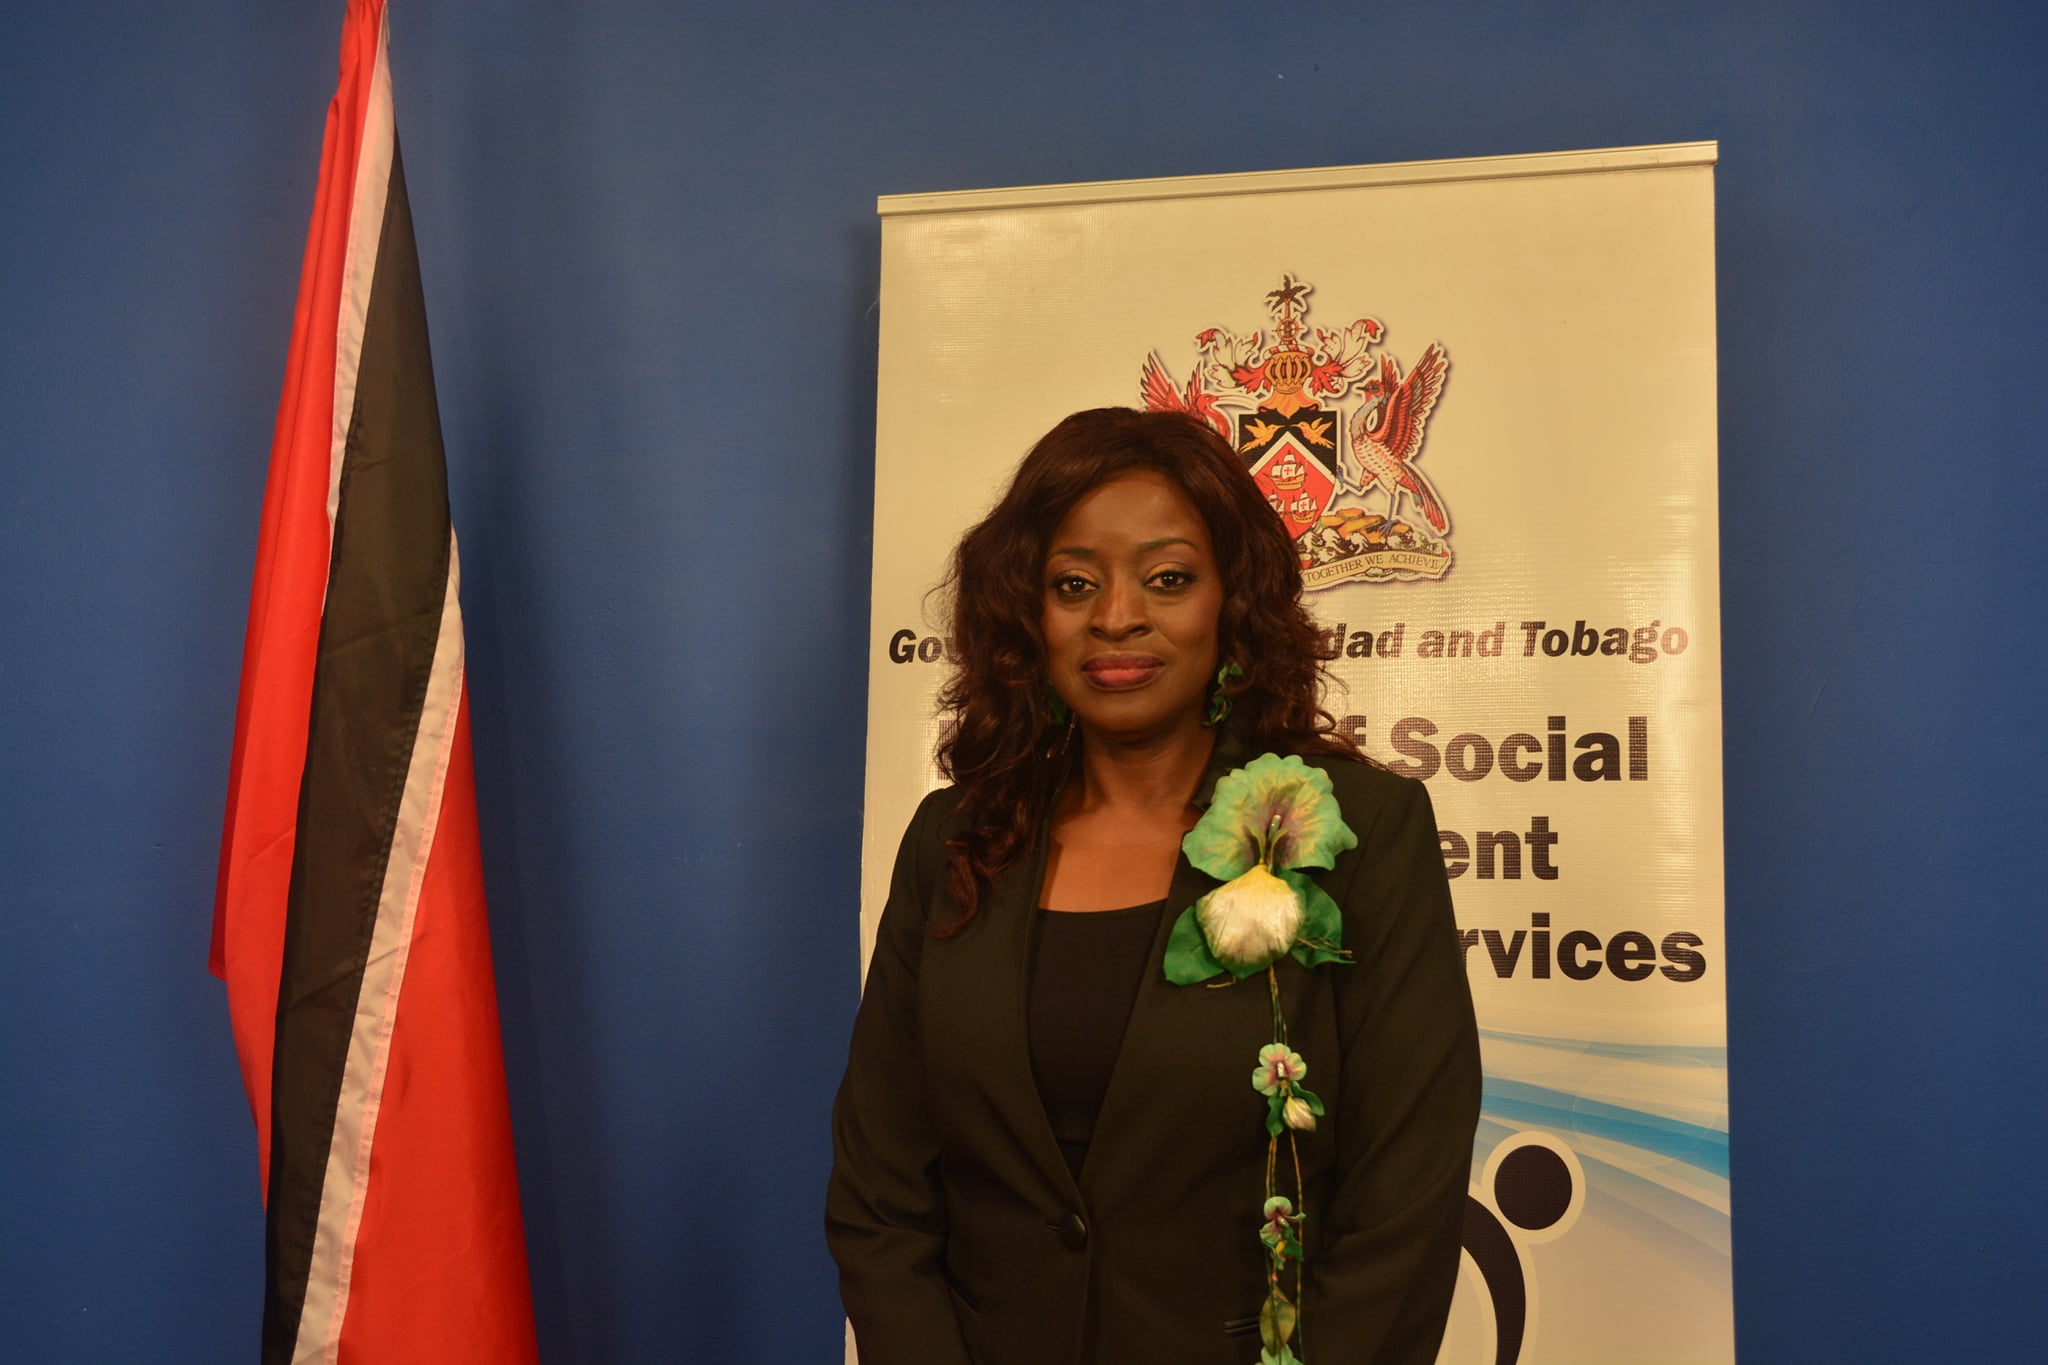 Social Development Minister says her comments were misinterpreted